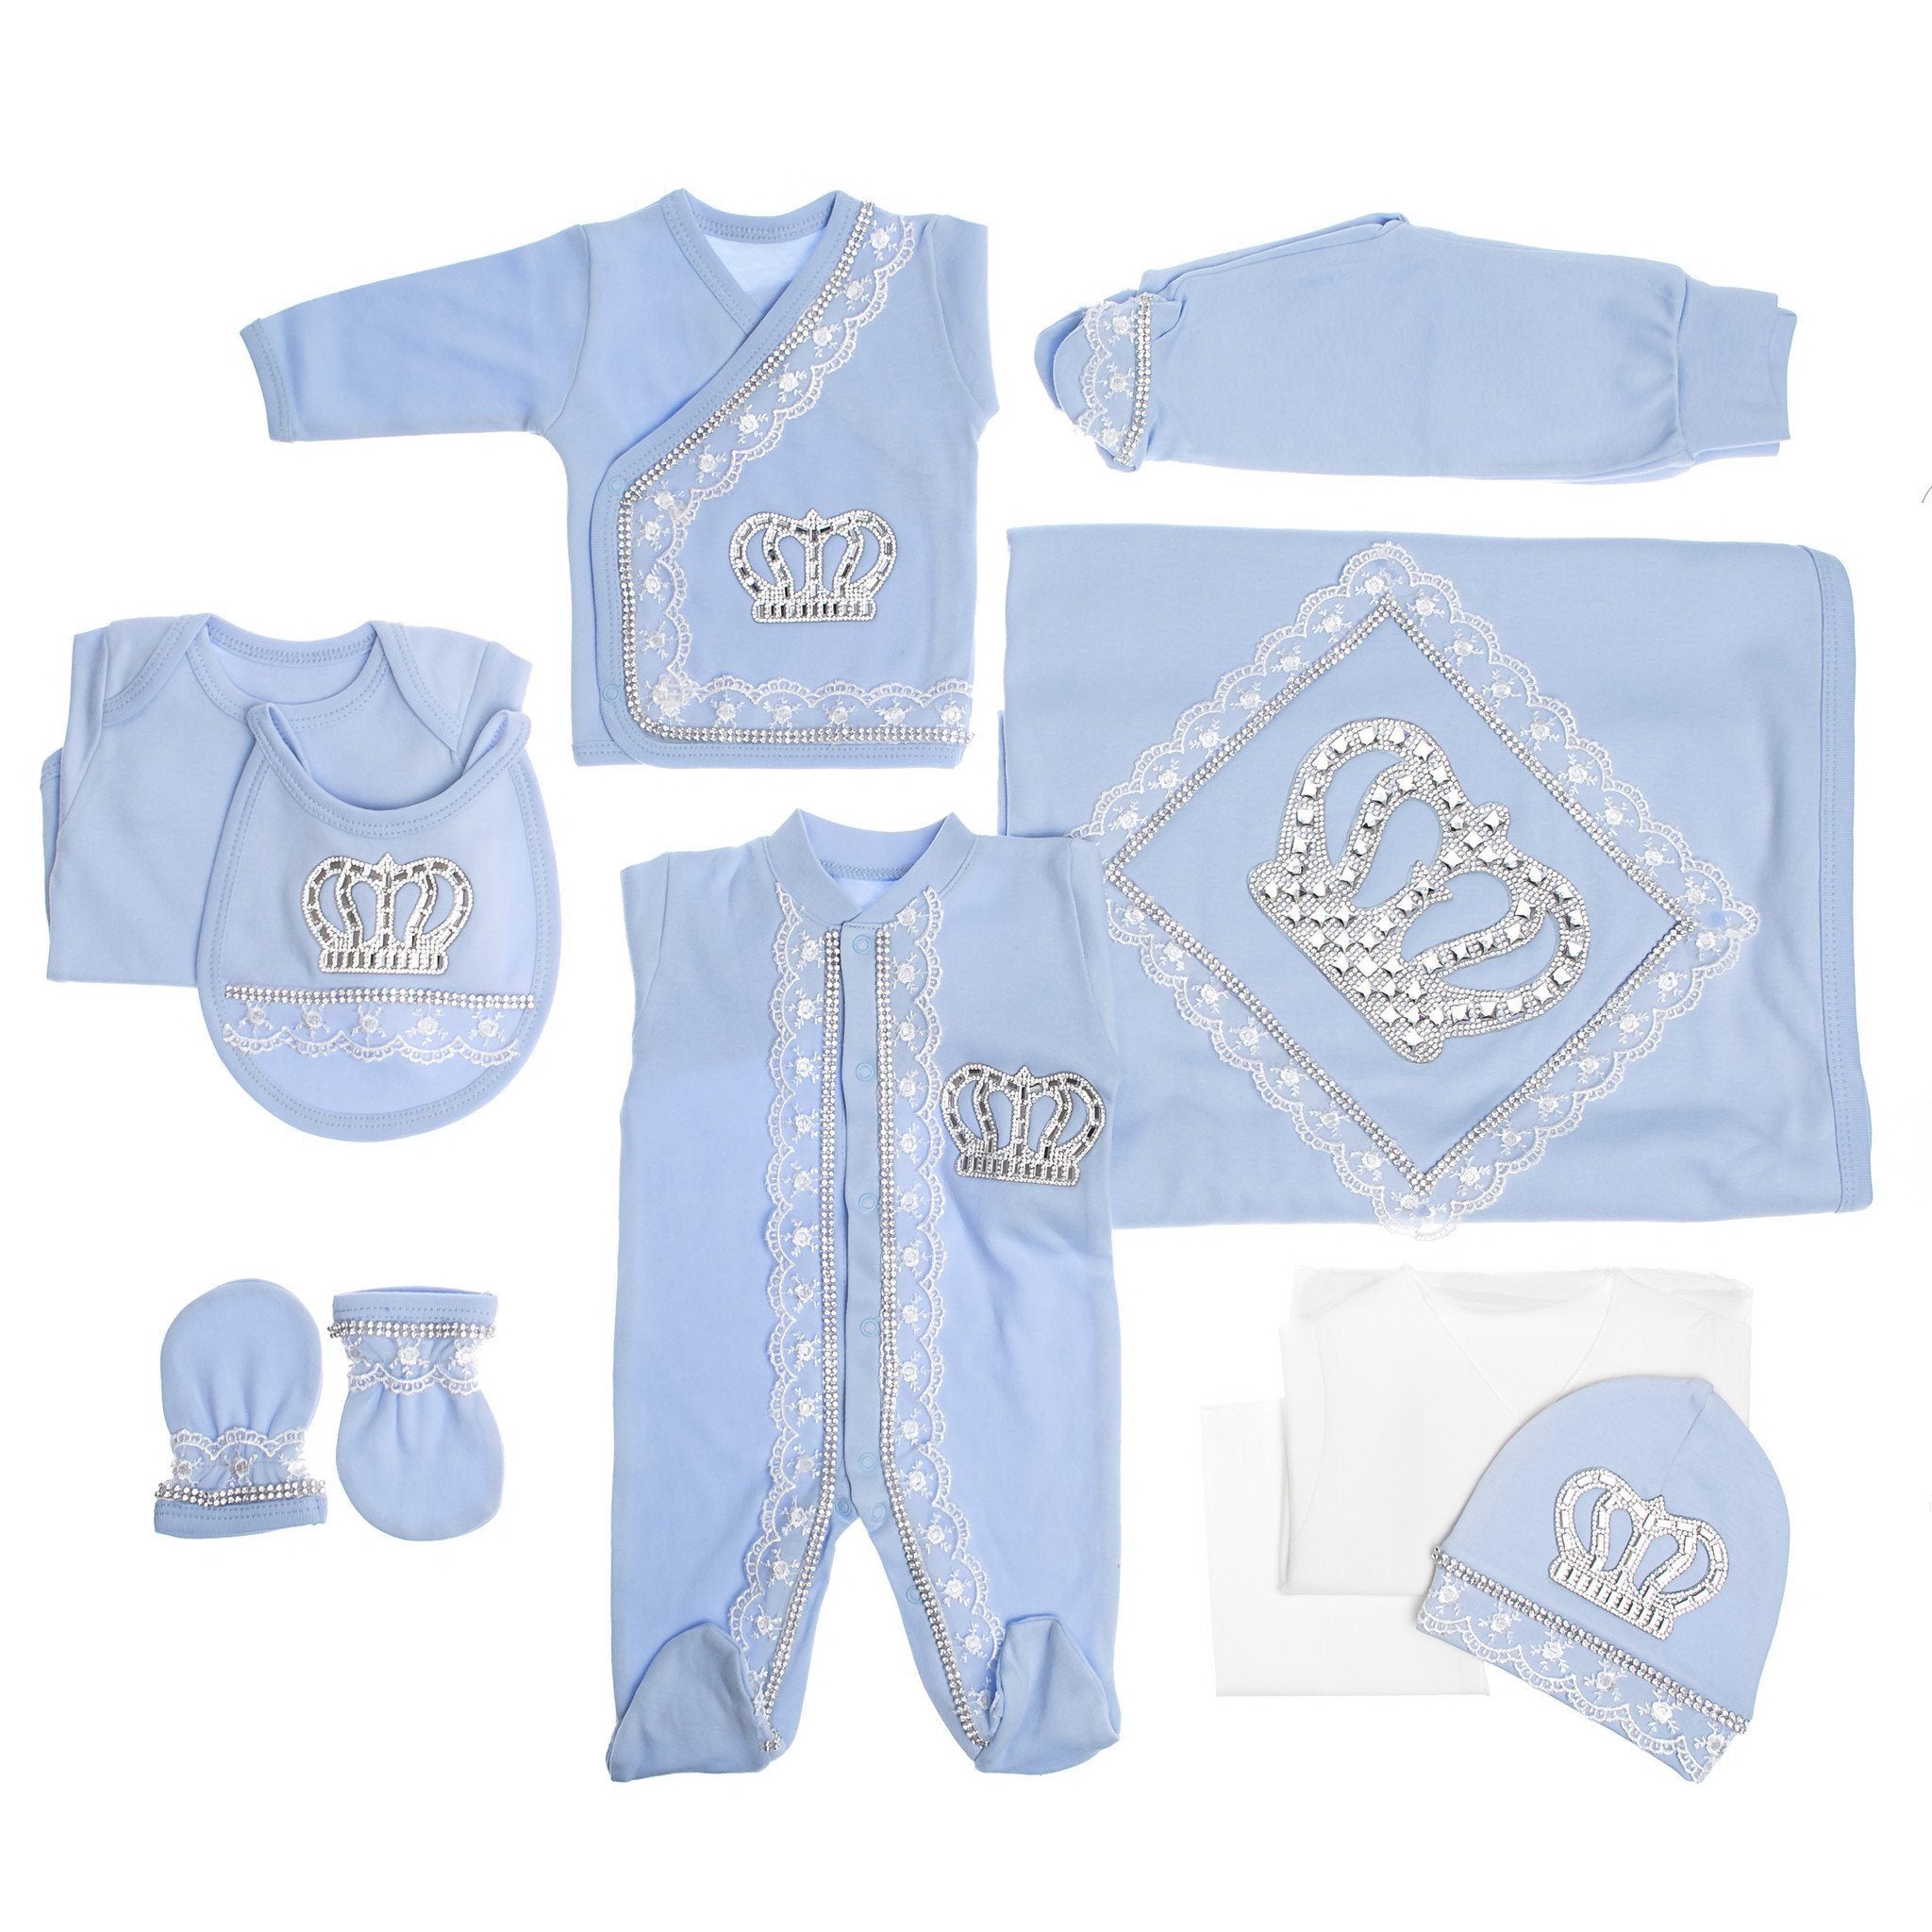 prince newborn outfit